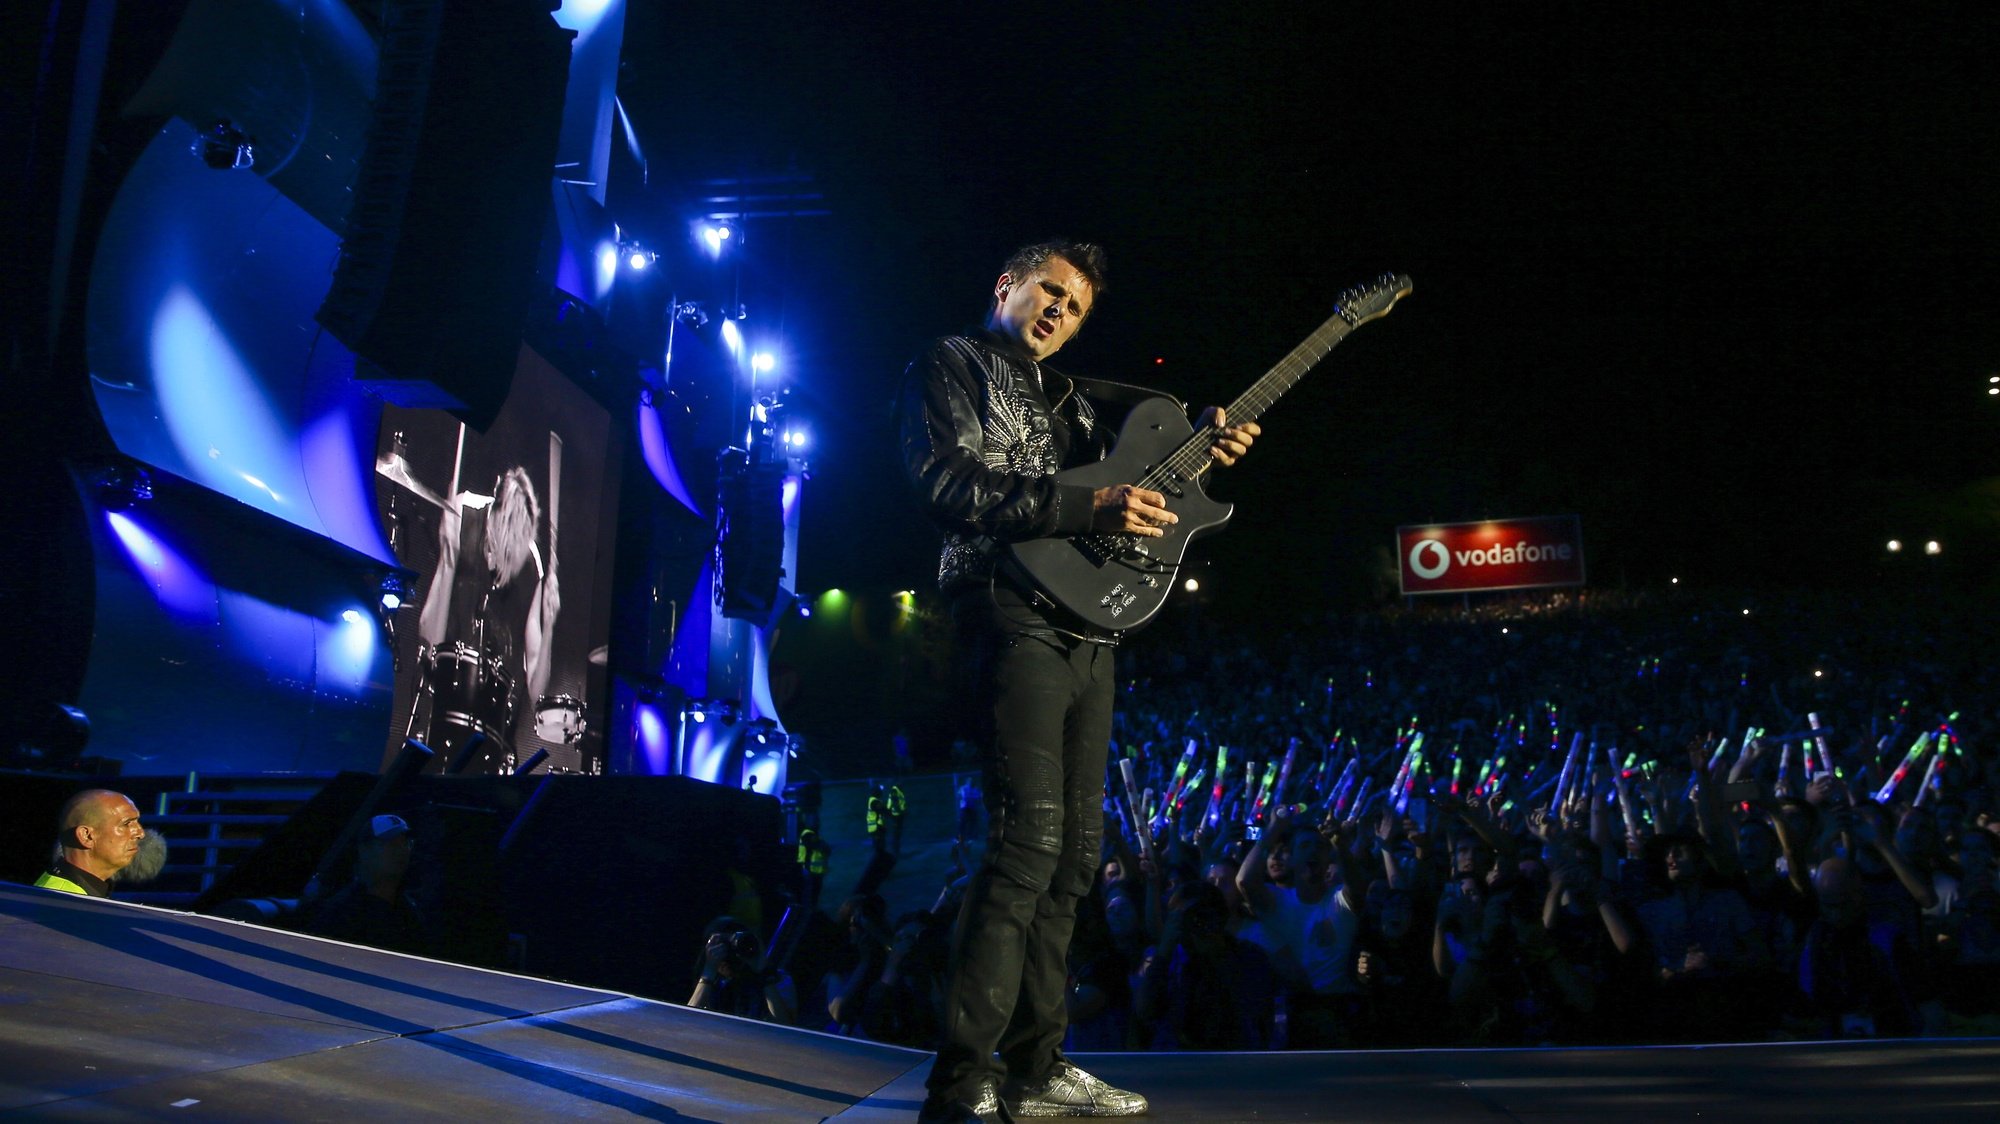 epa06835015 Lead singer and guitarist of British rock band Muse, Matthew Bellamy, performs on the World Stage at the 8th edition of Rock in Rio Lisbon, at Parque da Bela Vista in Lisbon, Portugal, 23 June 2018. British rock band Muse are tonight&#039;s headliners. The festival runs on June 23, 24, 29 and 30.  EPA/JOSÃ‰ SENA GOULÃƒO